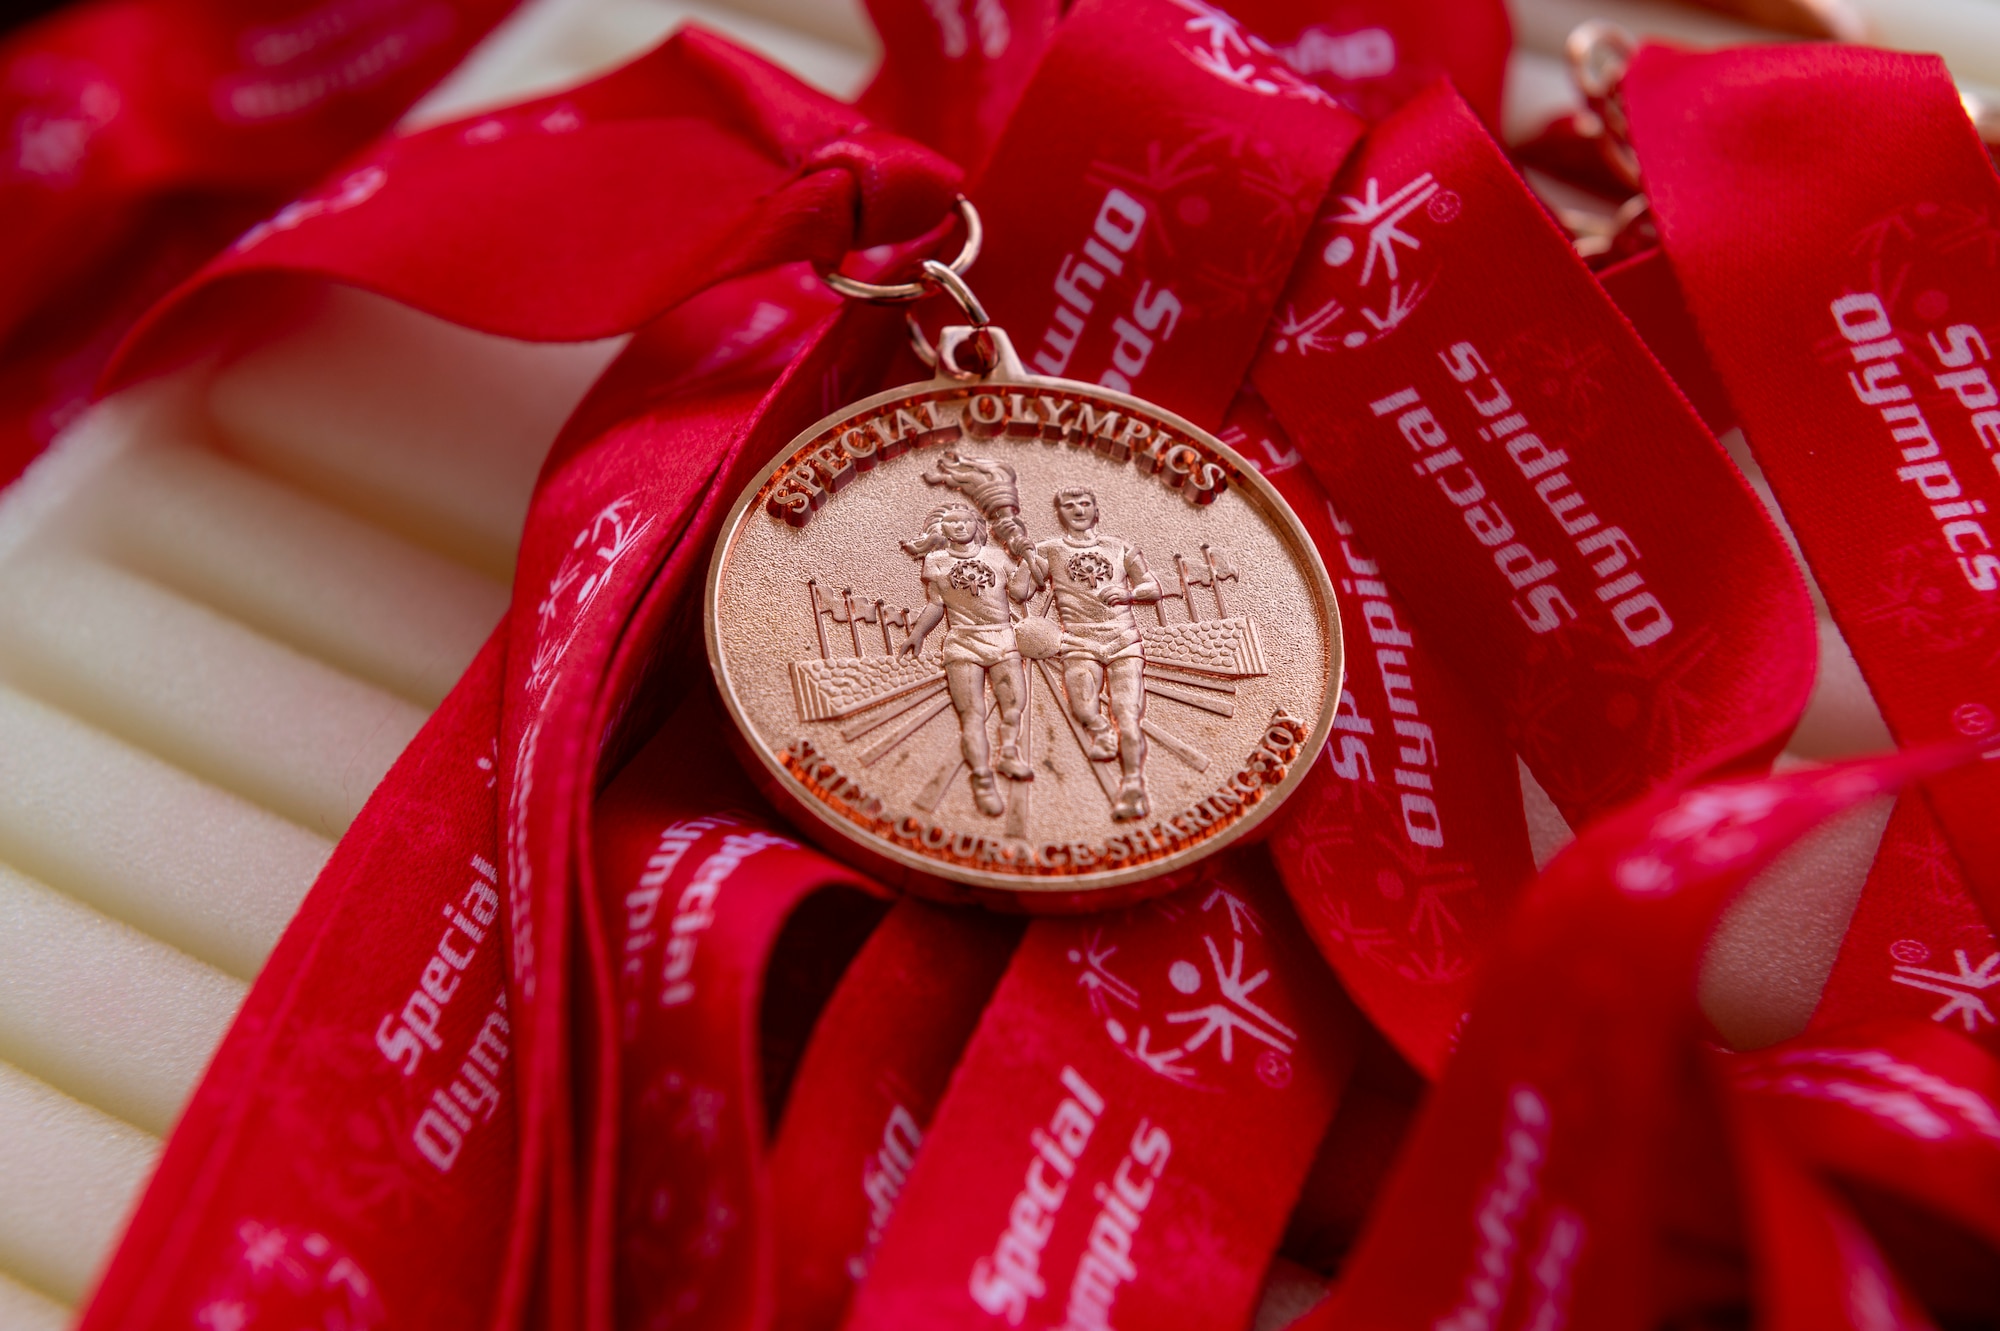 A medal from the Kanto Plains Special Olympics.